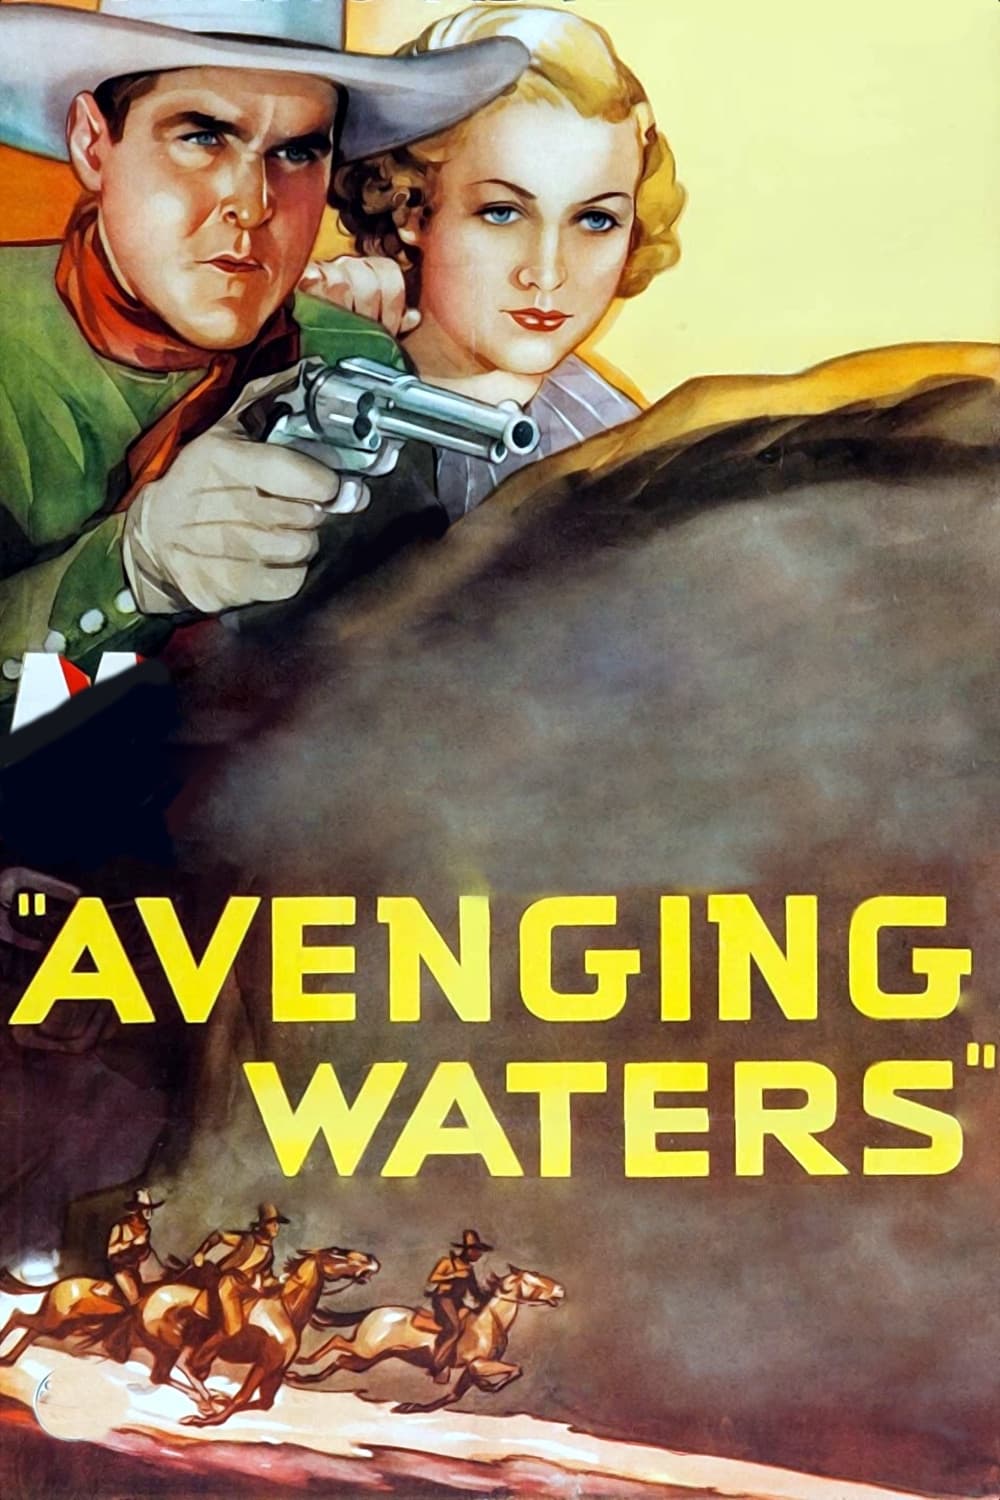 Avenging Waters (1936)